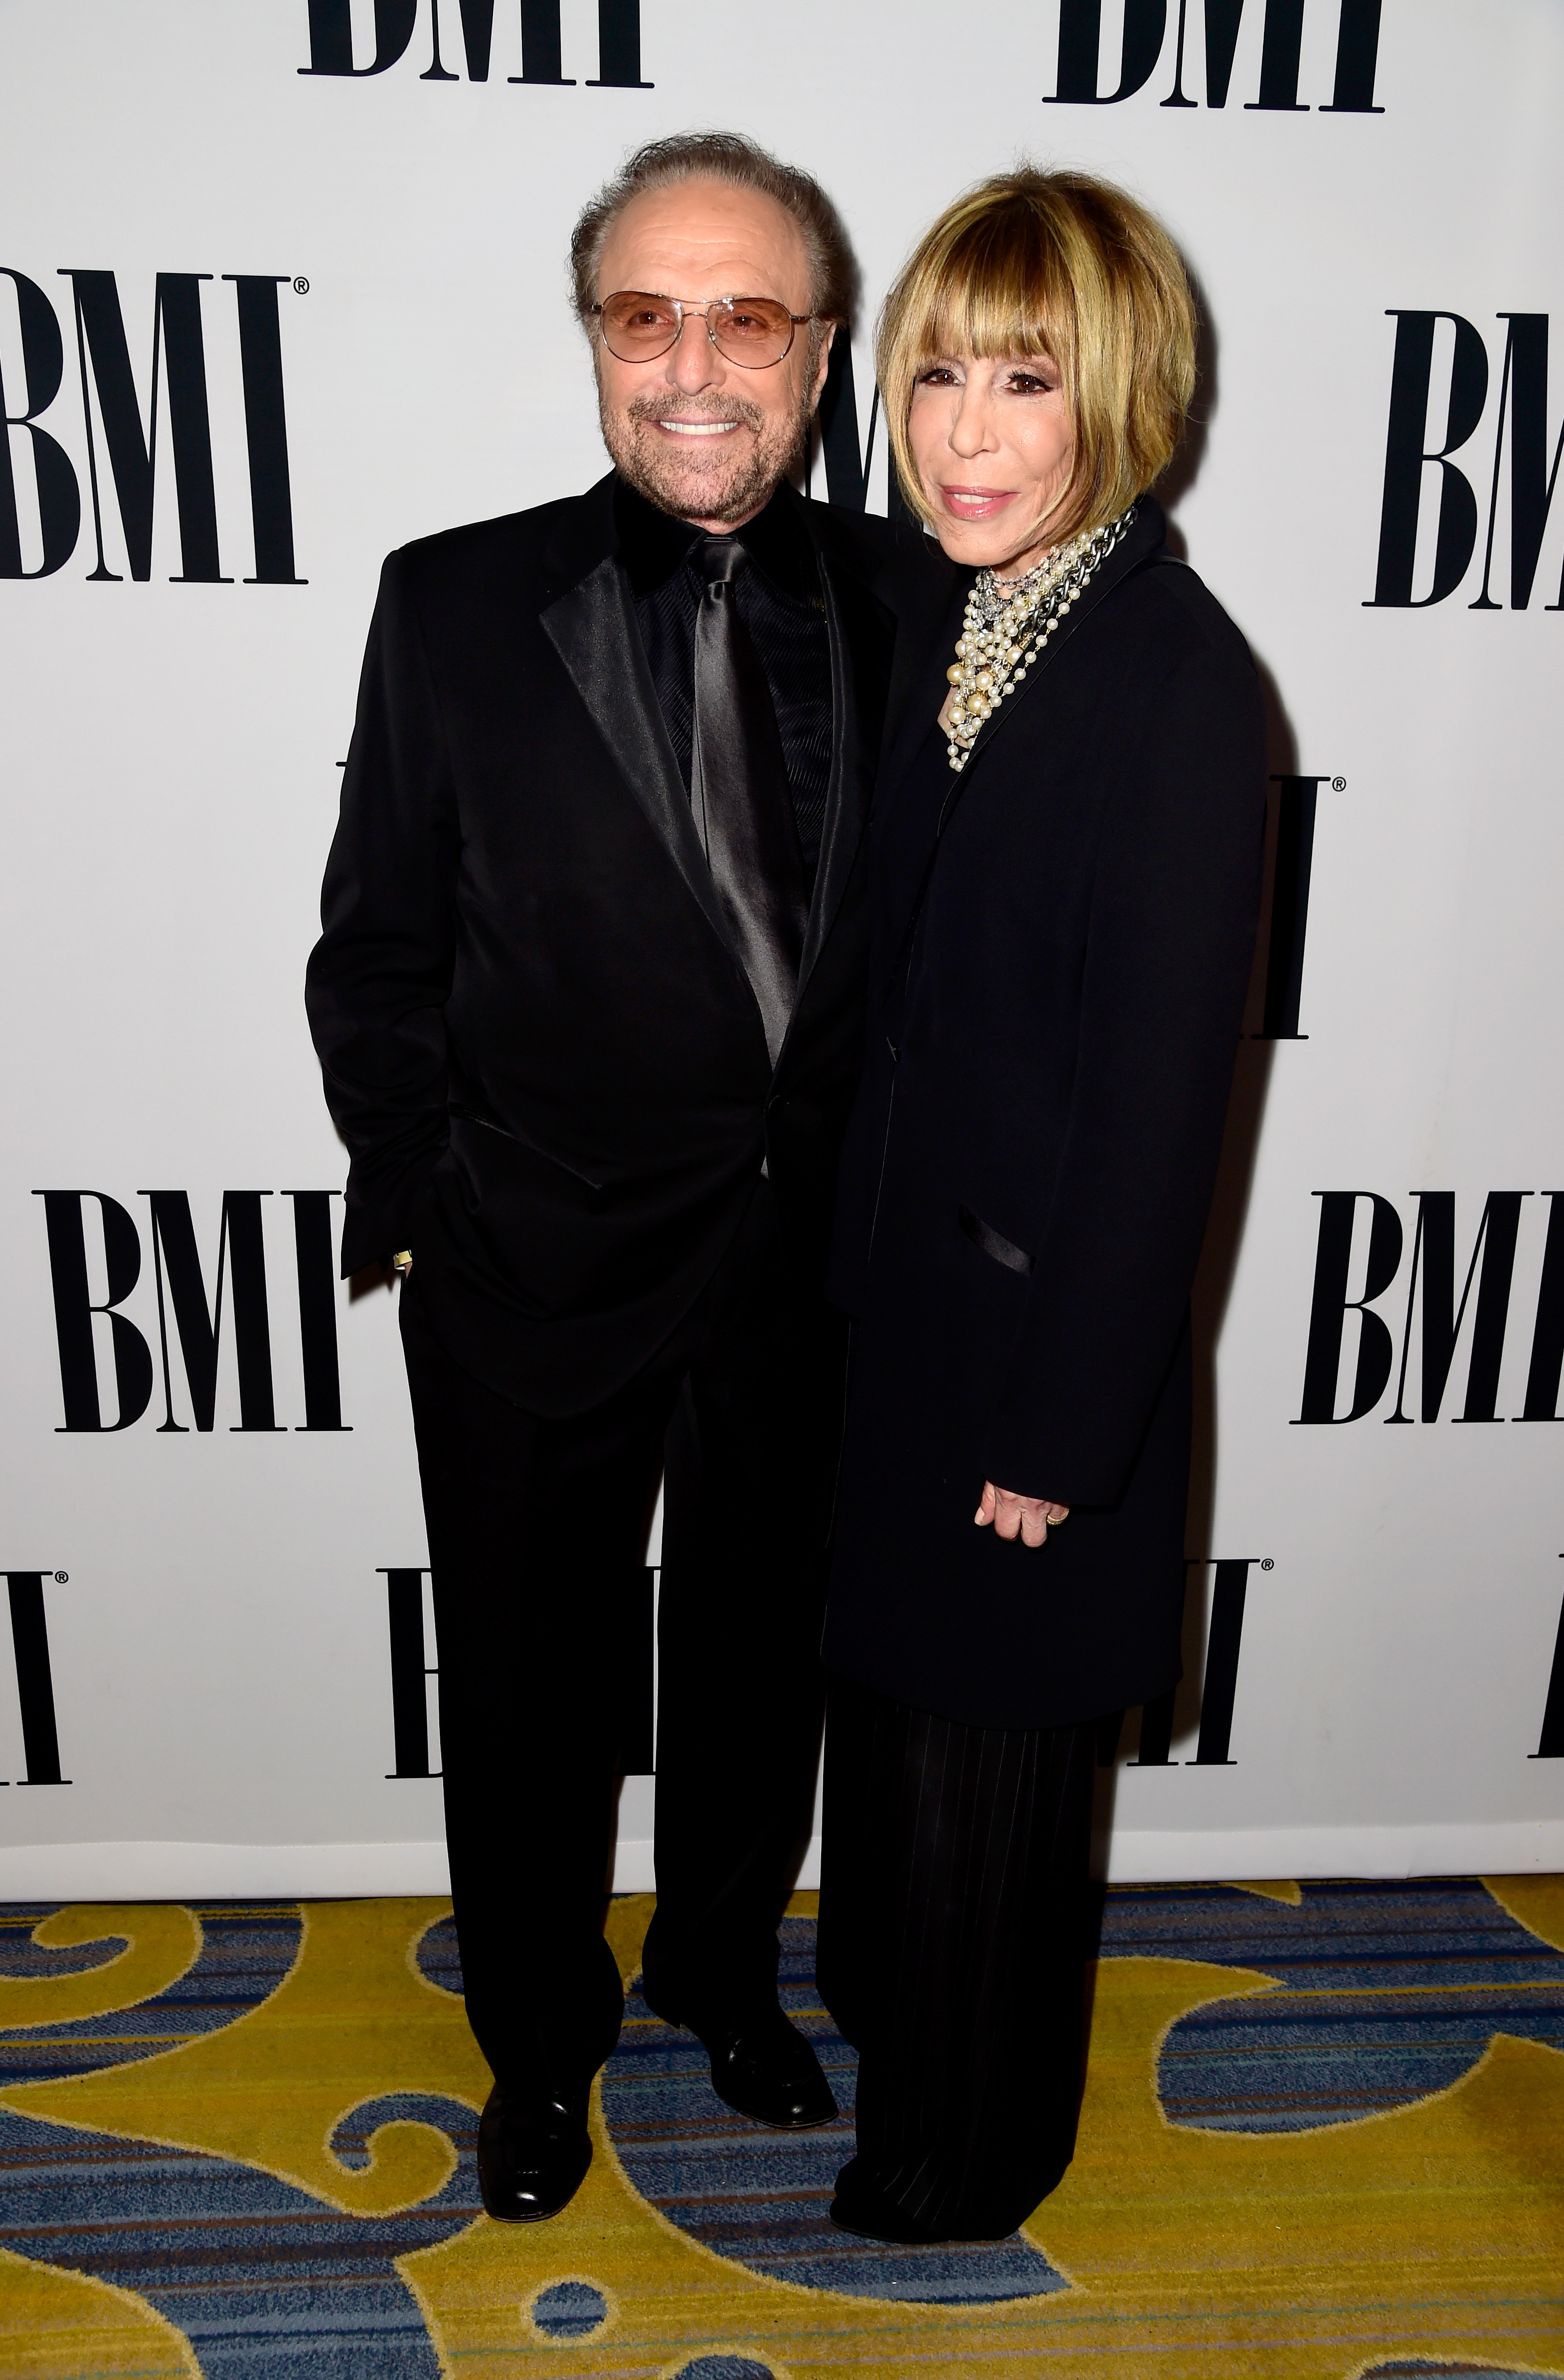 Honorees Barry Mann and Cynthia Weil pose at The 64th Annual BMI Pop Awards at the Beverly Wilshire Four Seasons Hotel on May 10, 2016, in Beverly Hills, California | Source: Getty Images